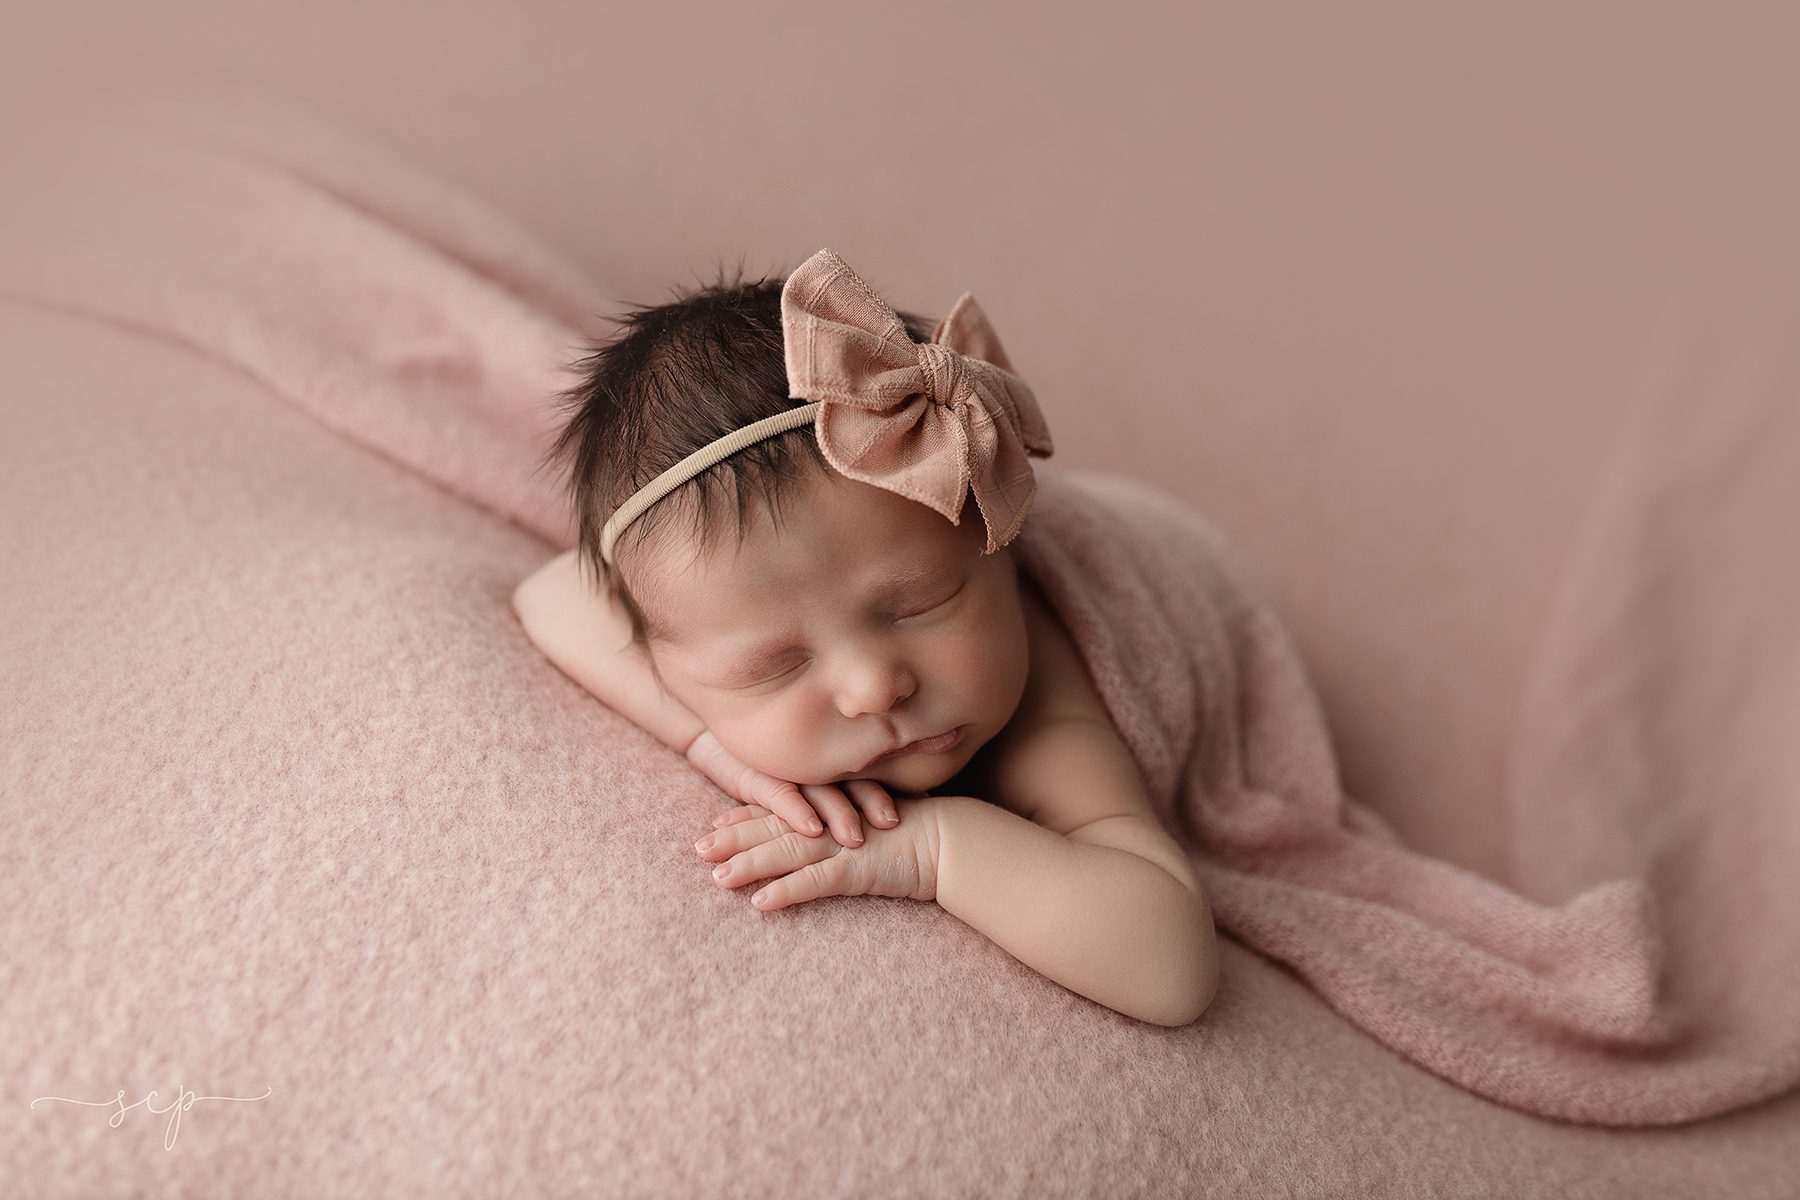 knoxville newborn photography